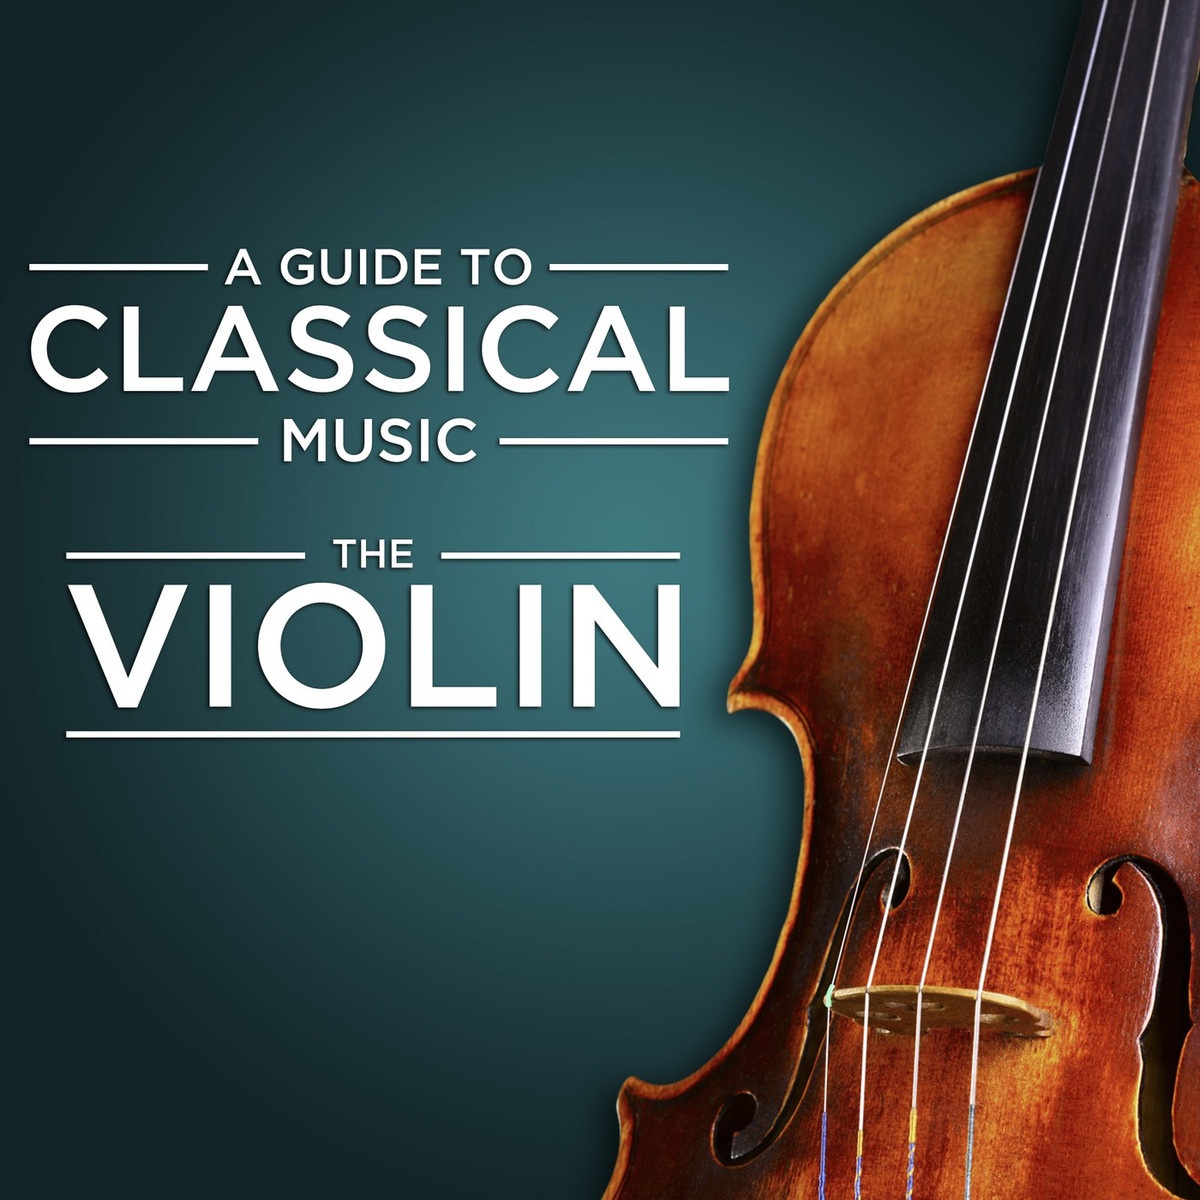 A Guide to Classical Music: The Violin